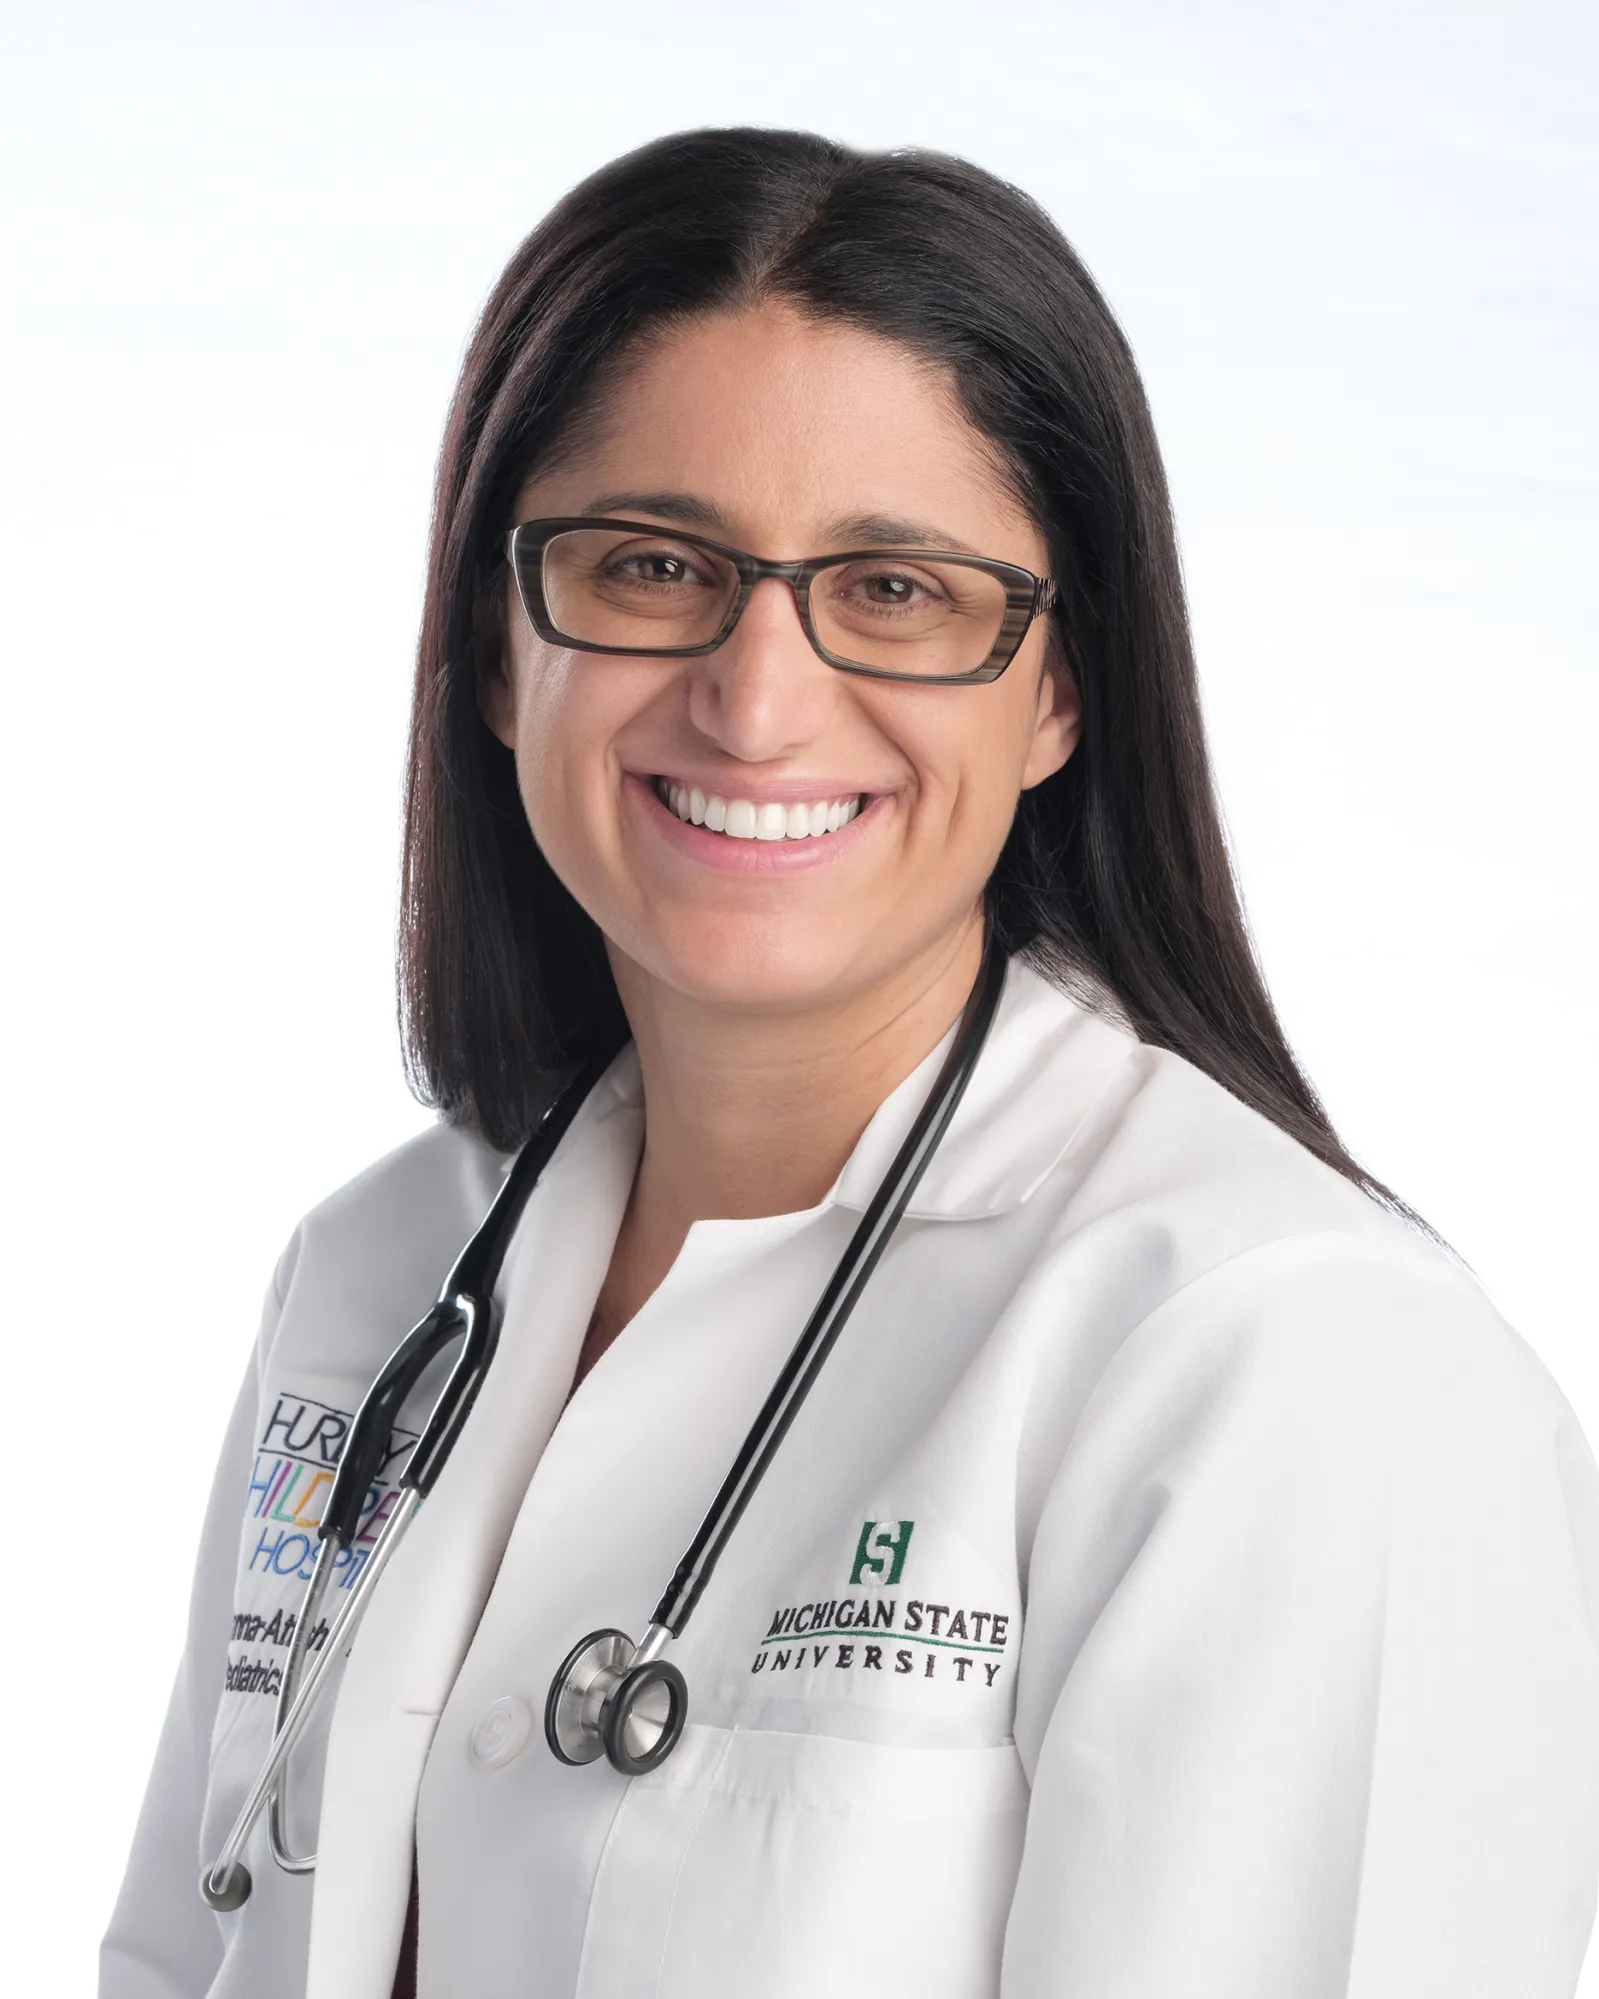 Photo of female Middle Eastern Doctor